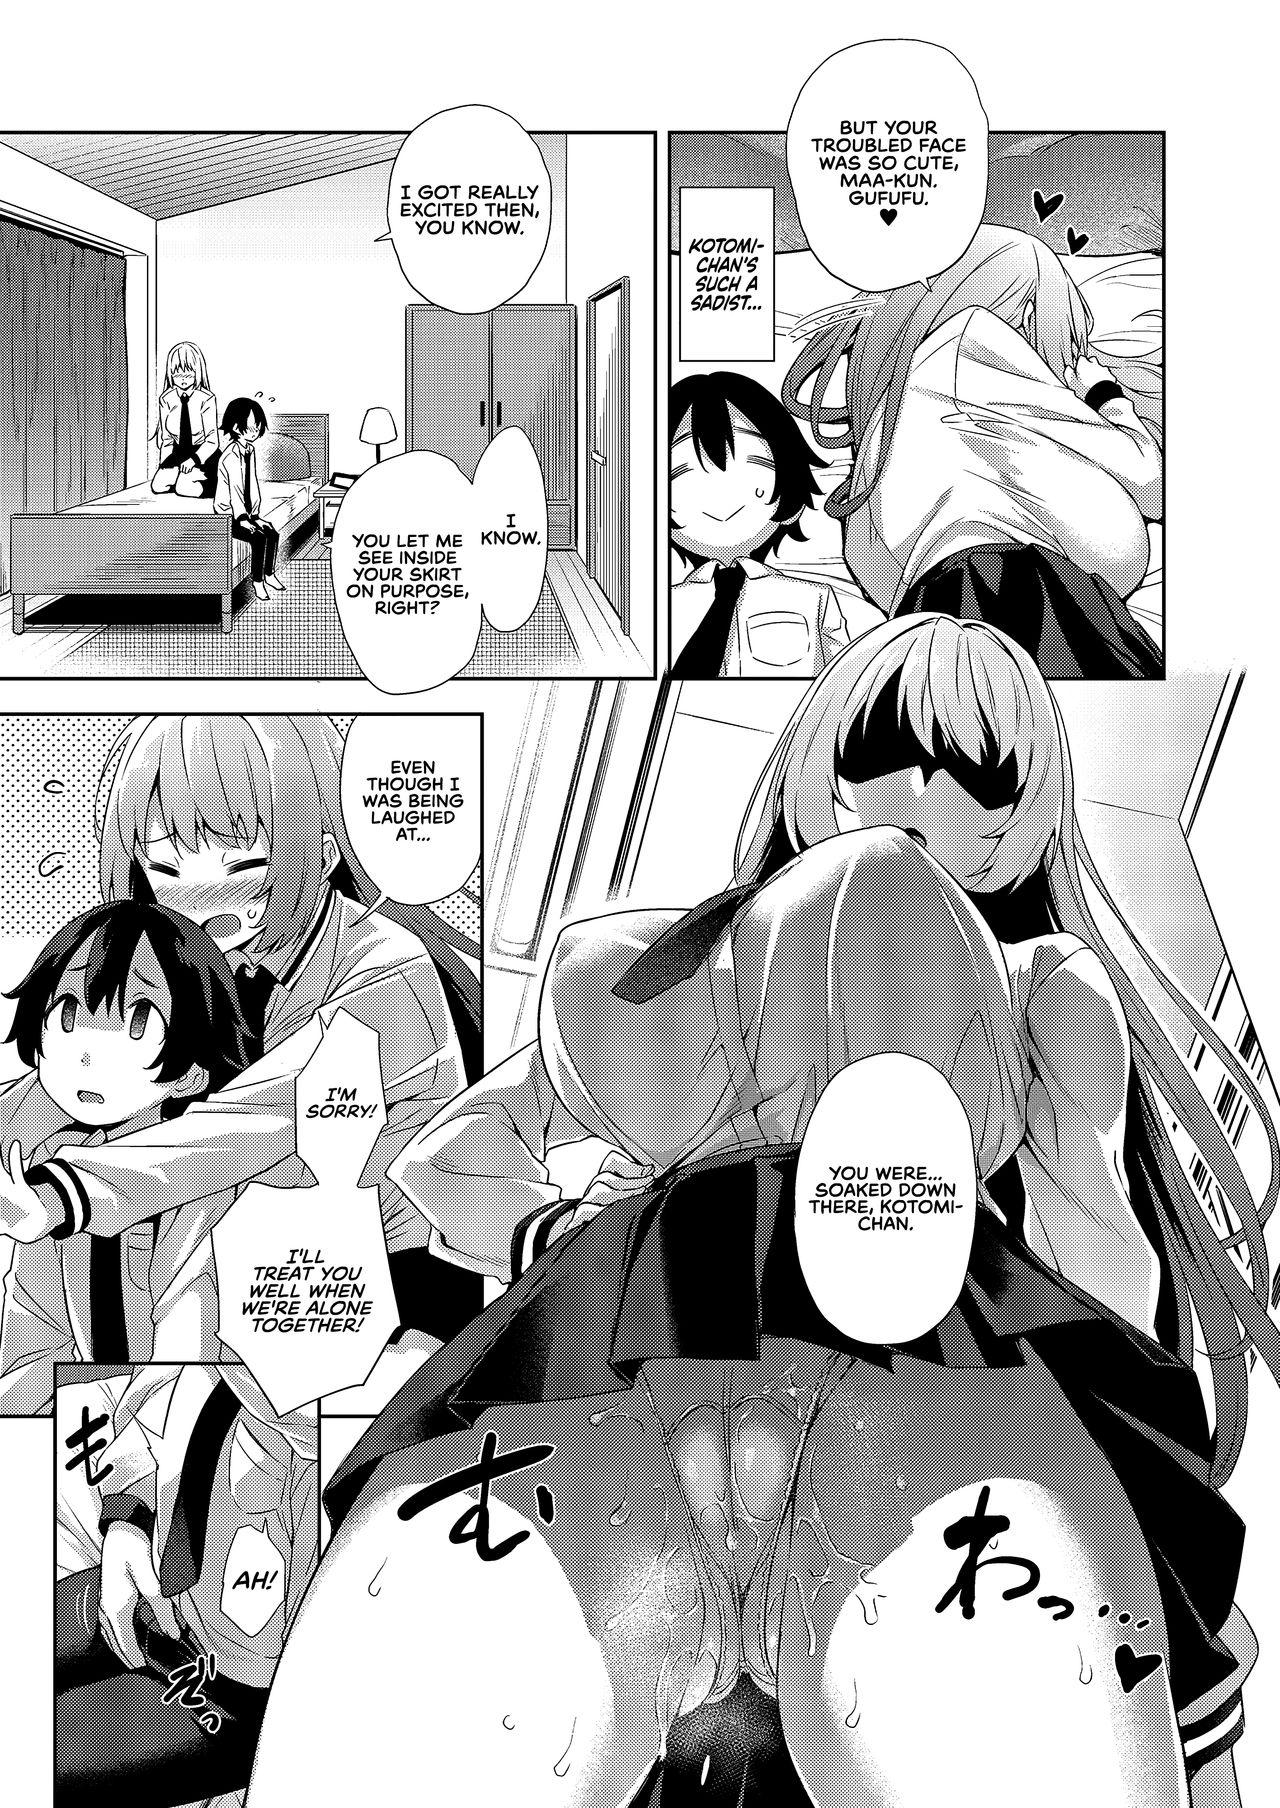 Gakkou to Bed ja Seihantai no, Okkina Kanojo. | My Big Girlfriend Acts the Polar Opposite in Bed and at School. 8